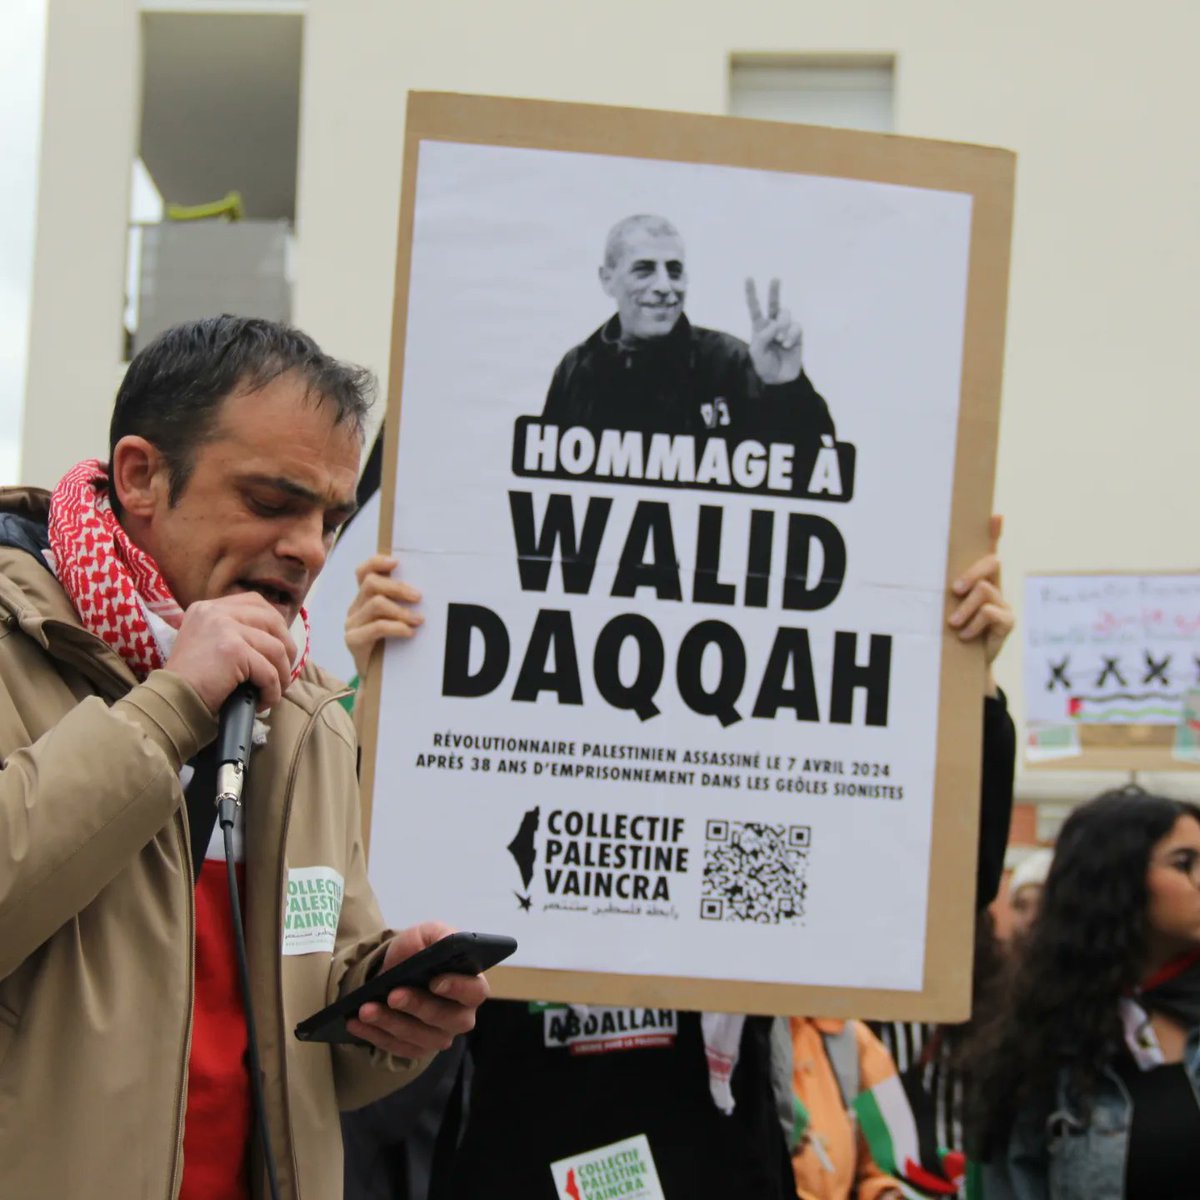 We held joint protests between Toulouse and Lurgan last night to mark Palestinian Prisoners Day and honour the memory of PFLP martyr, Walid Daqqa, who died of cancer in a Zionist cell. We need to keep building our solidarity movement internationally to smash the apartheid state.